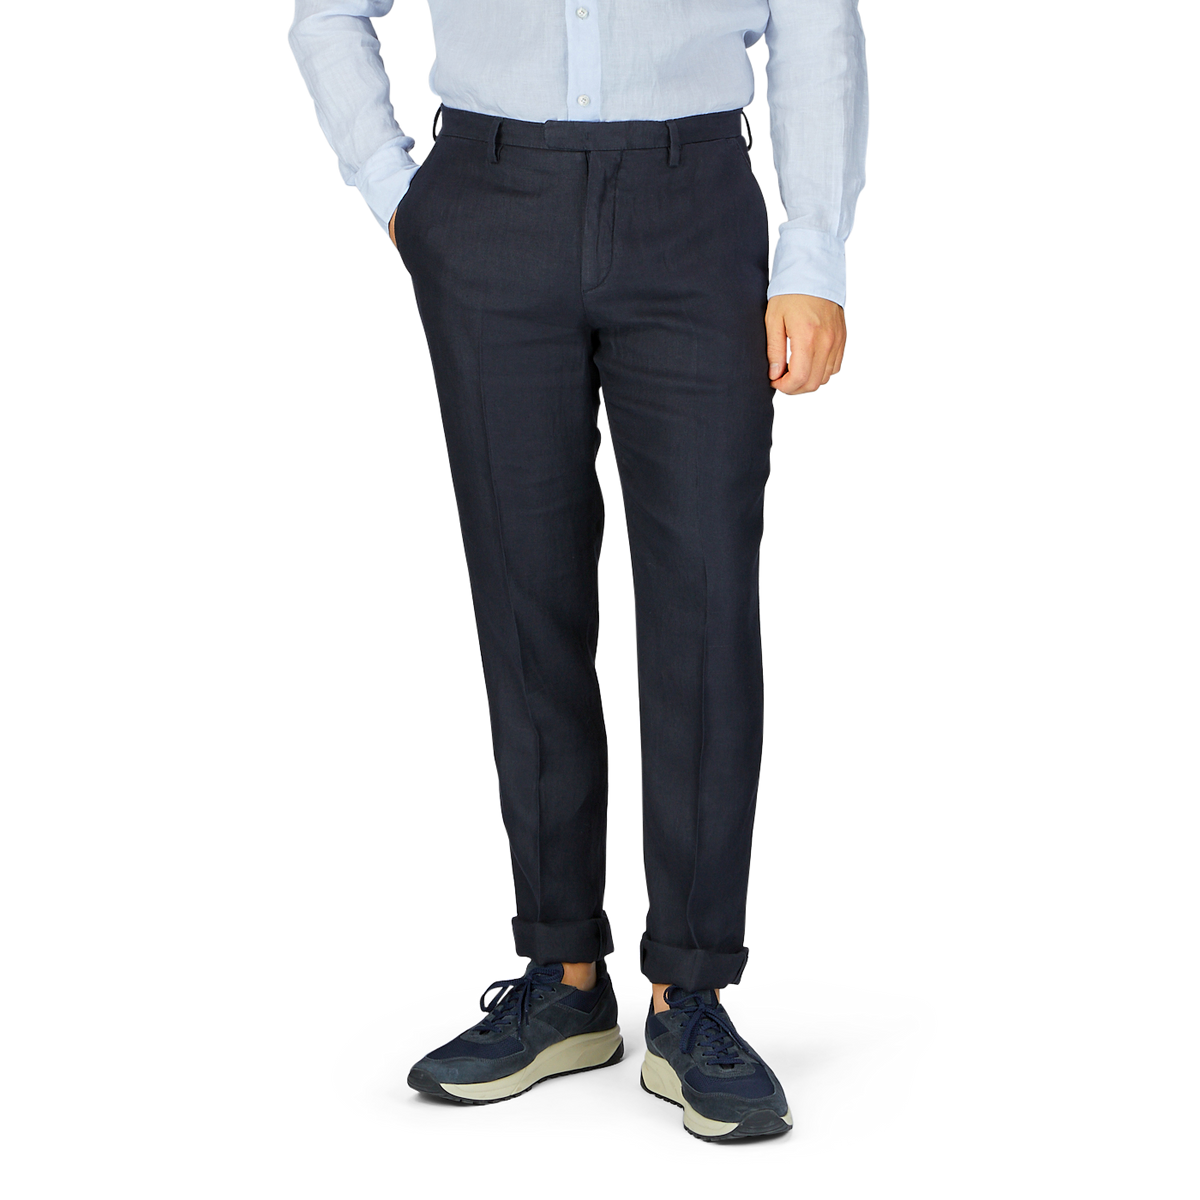 Man wearing a light blue, pure linen shirt, Boglioli navy blue washed Irish linen trousers, and sneakers, standing against a neutral background.